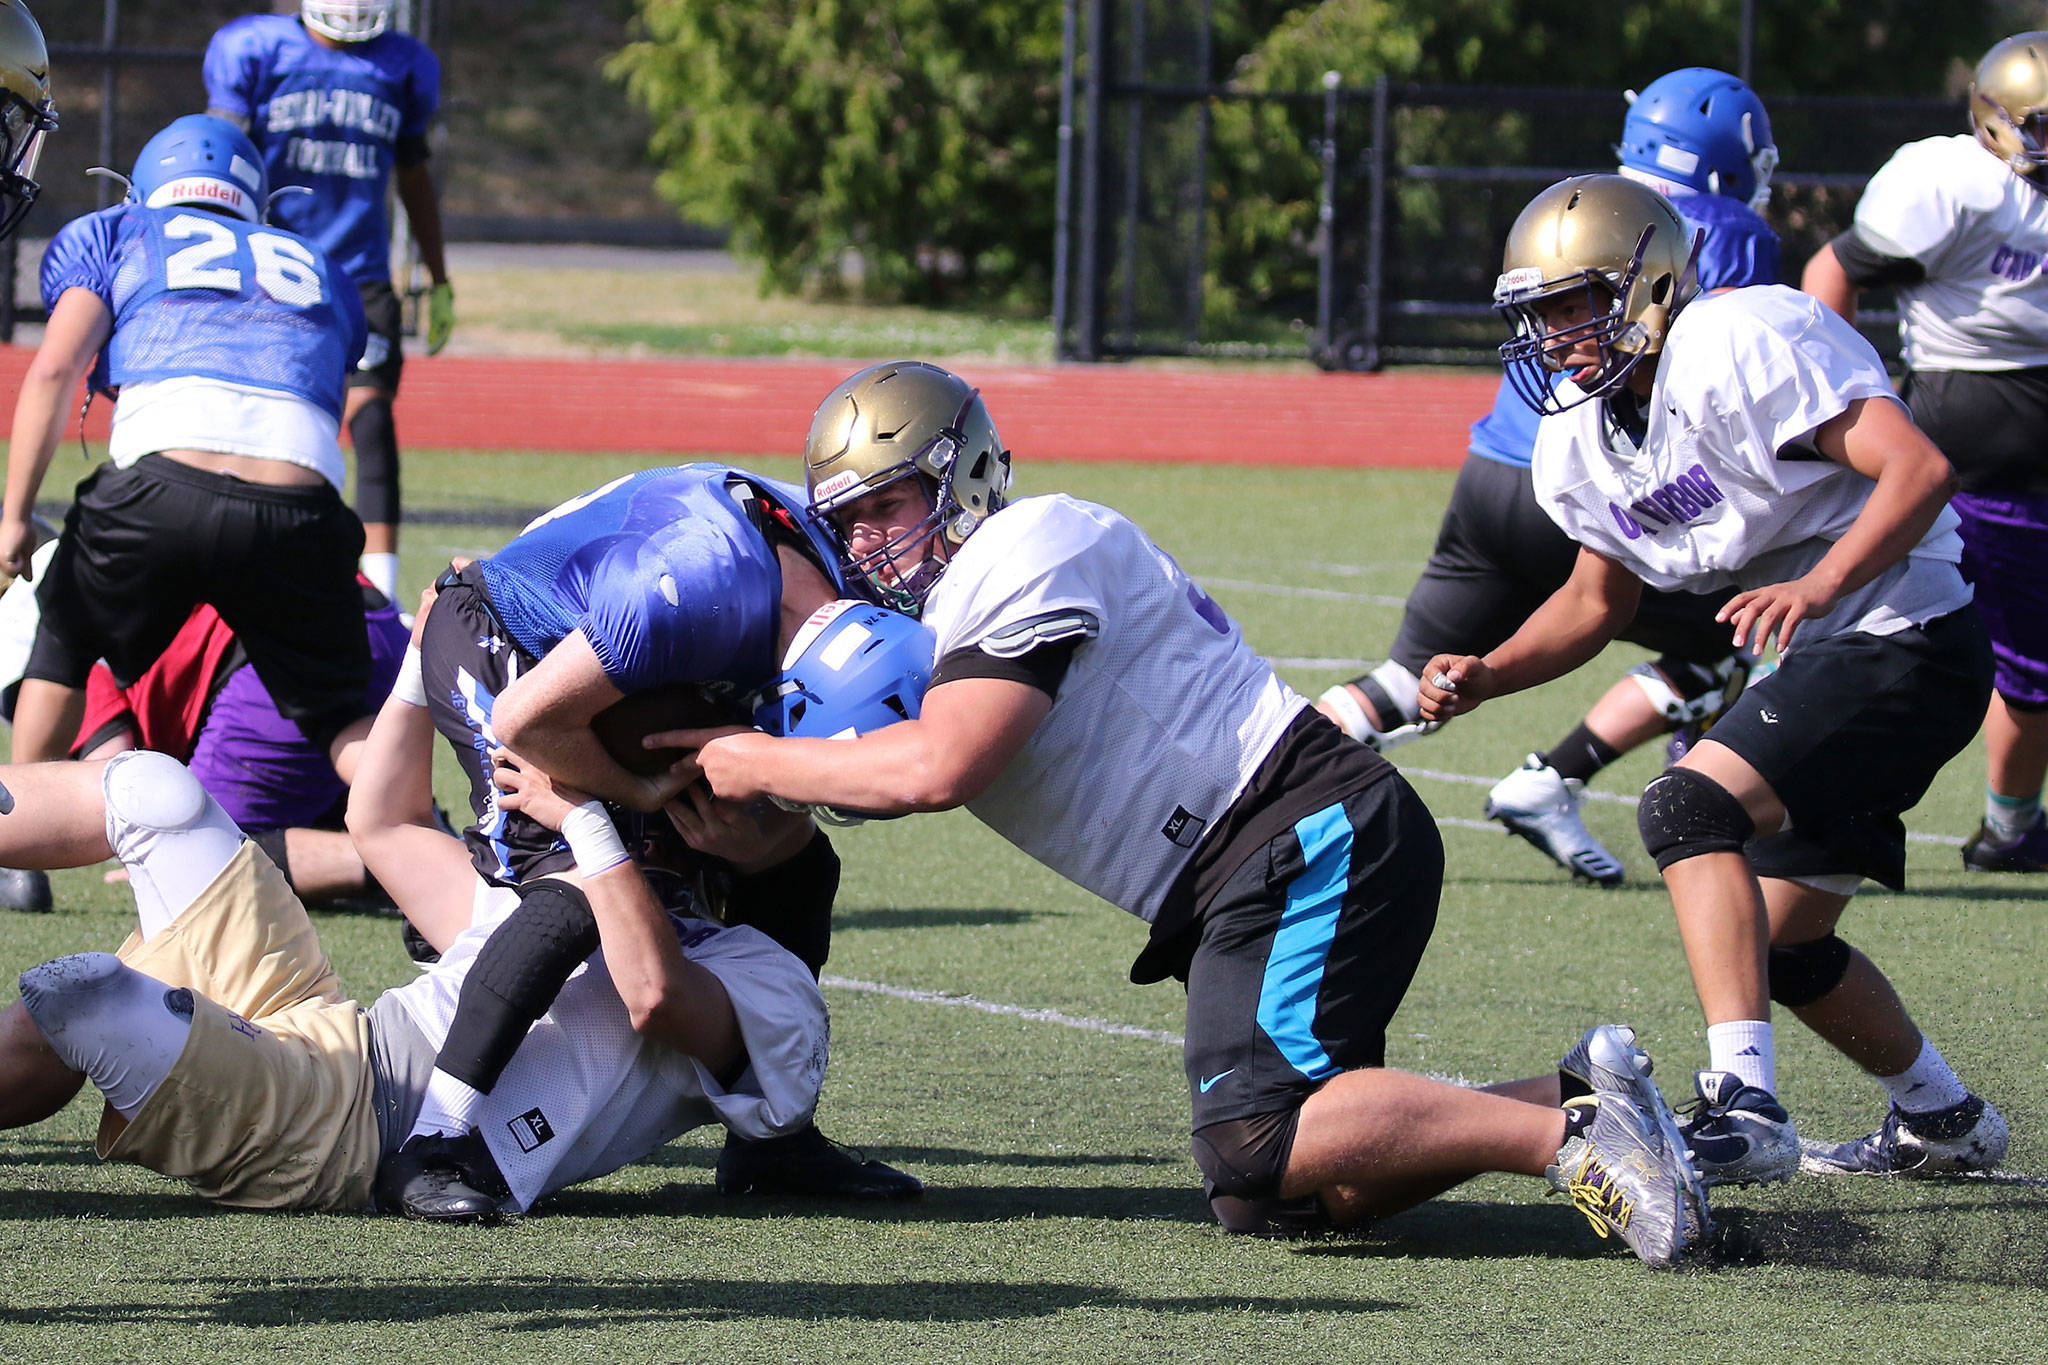 Michael Fisken, center, helps take down a Sedro-Woolley ball carrier in Tuesday’s scrimmage. (Photo by John Fisken)